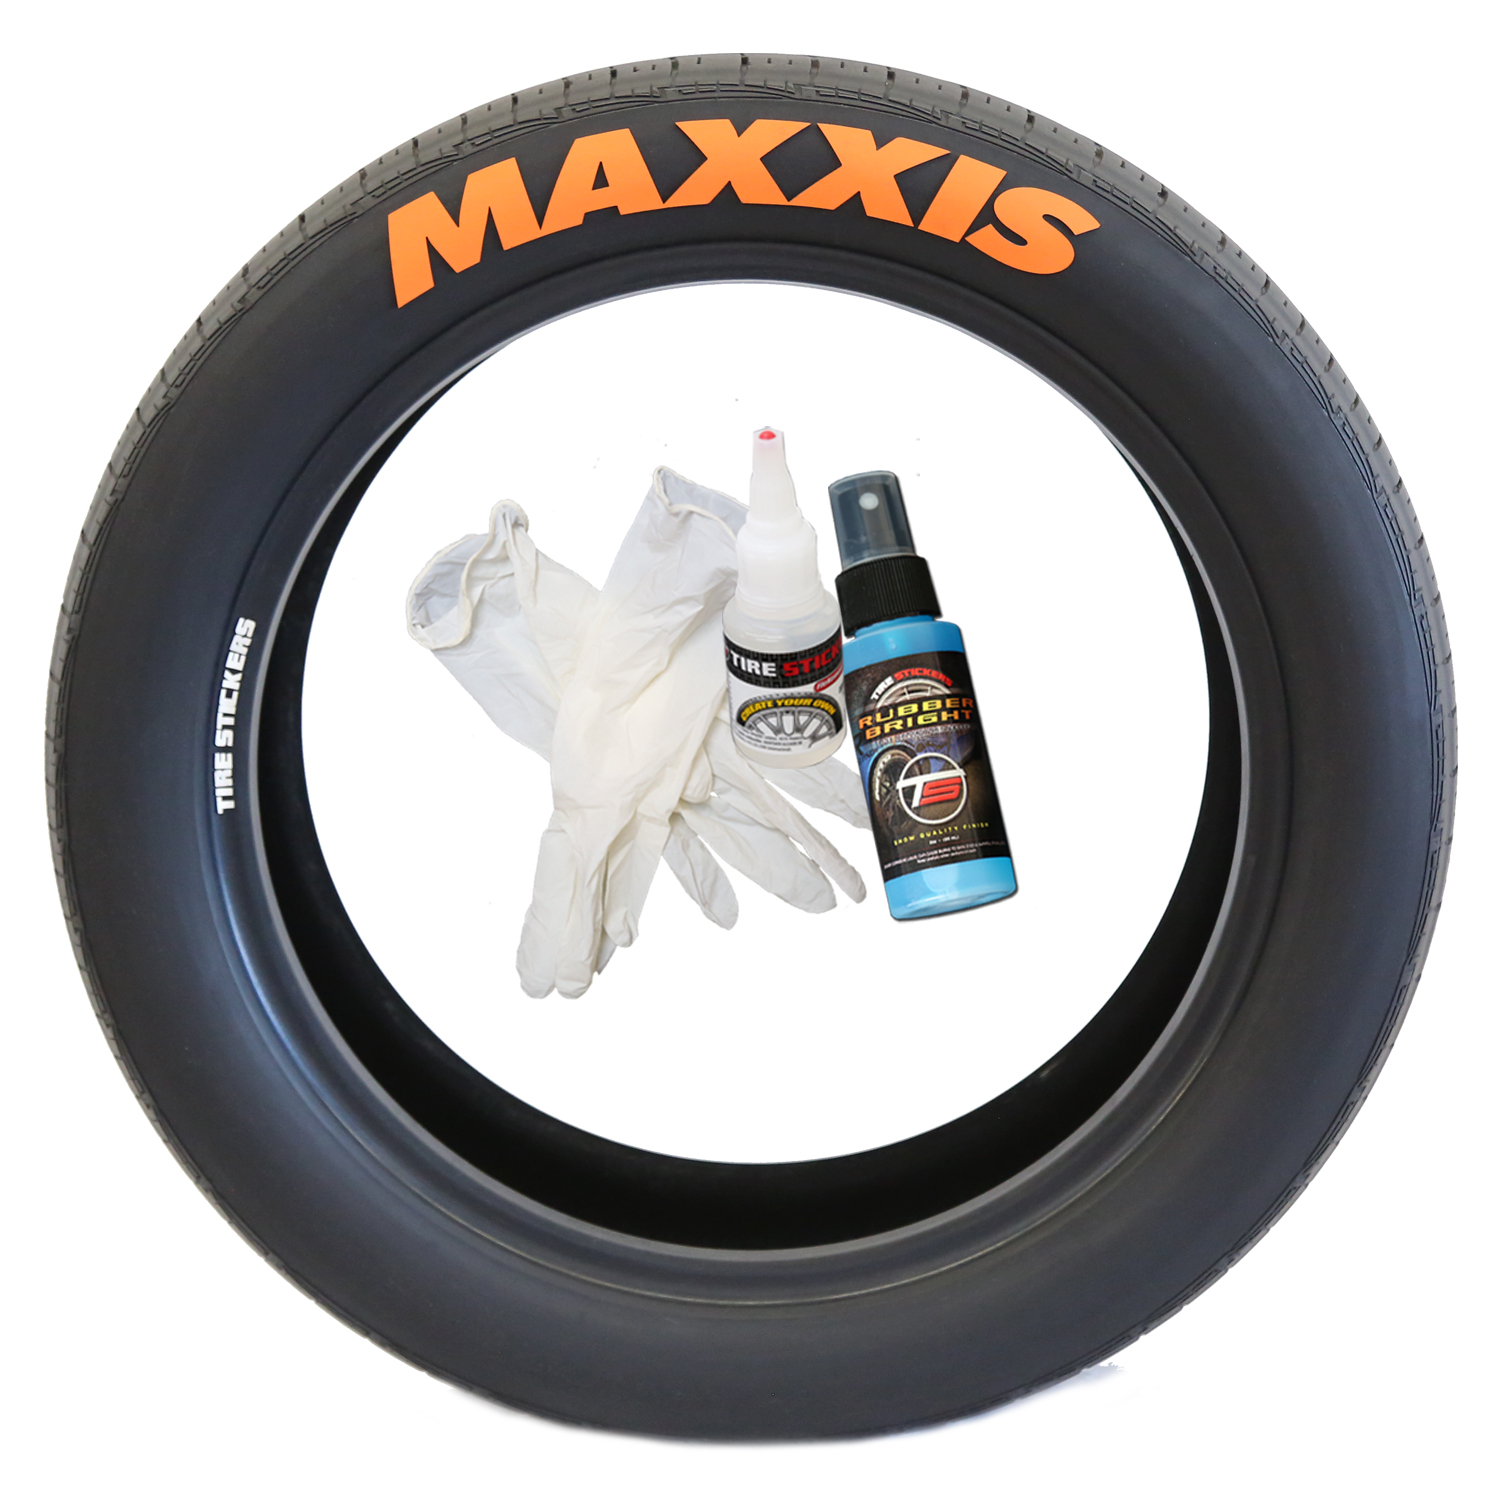 Maxxis Oval Stickers Decals Tires Bike 